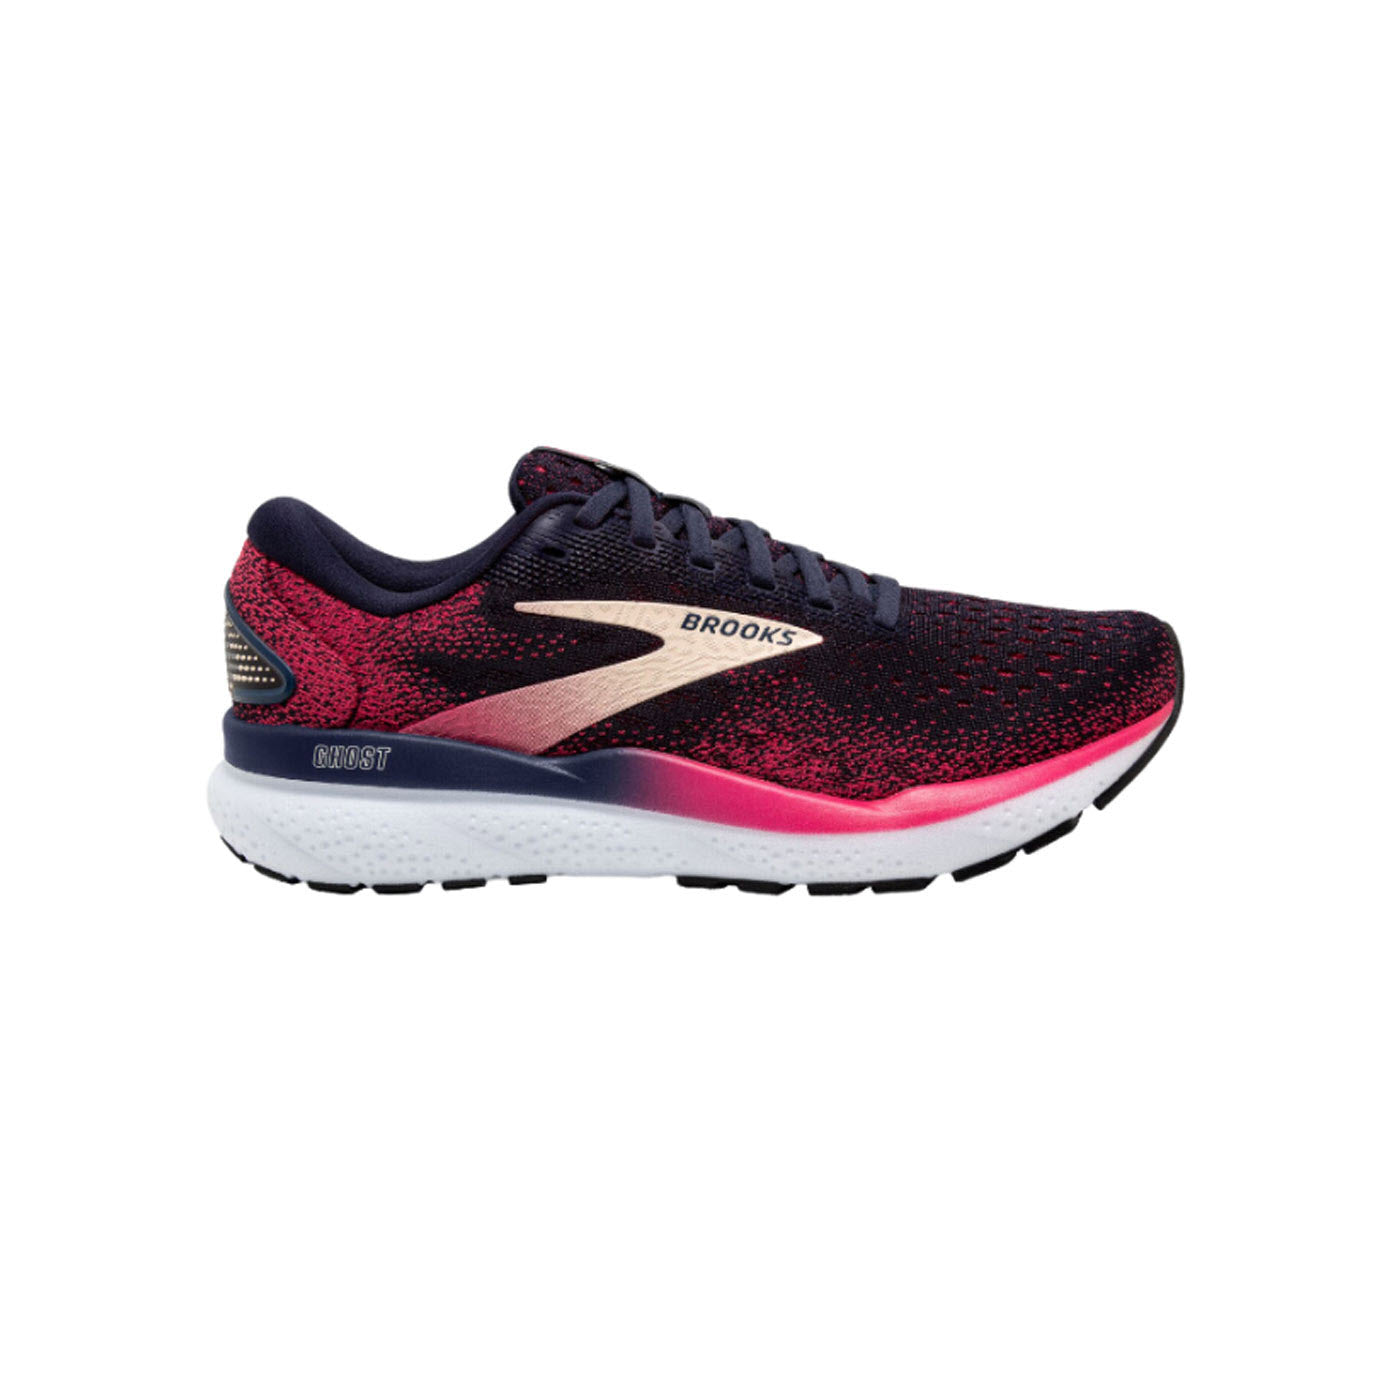 A Brooks Ghost 16 Peacoat/Raspberry/Apricot running shoe with a red and black breathable mesh upper, white midsole, and gold accents, viewed from the side.